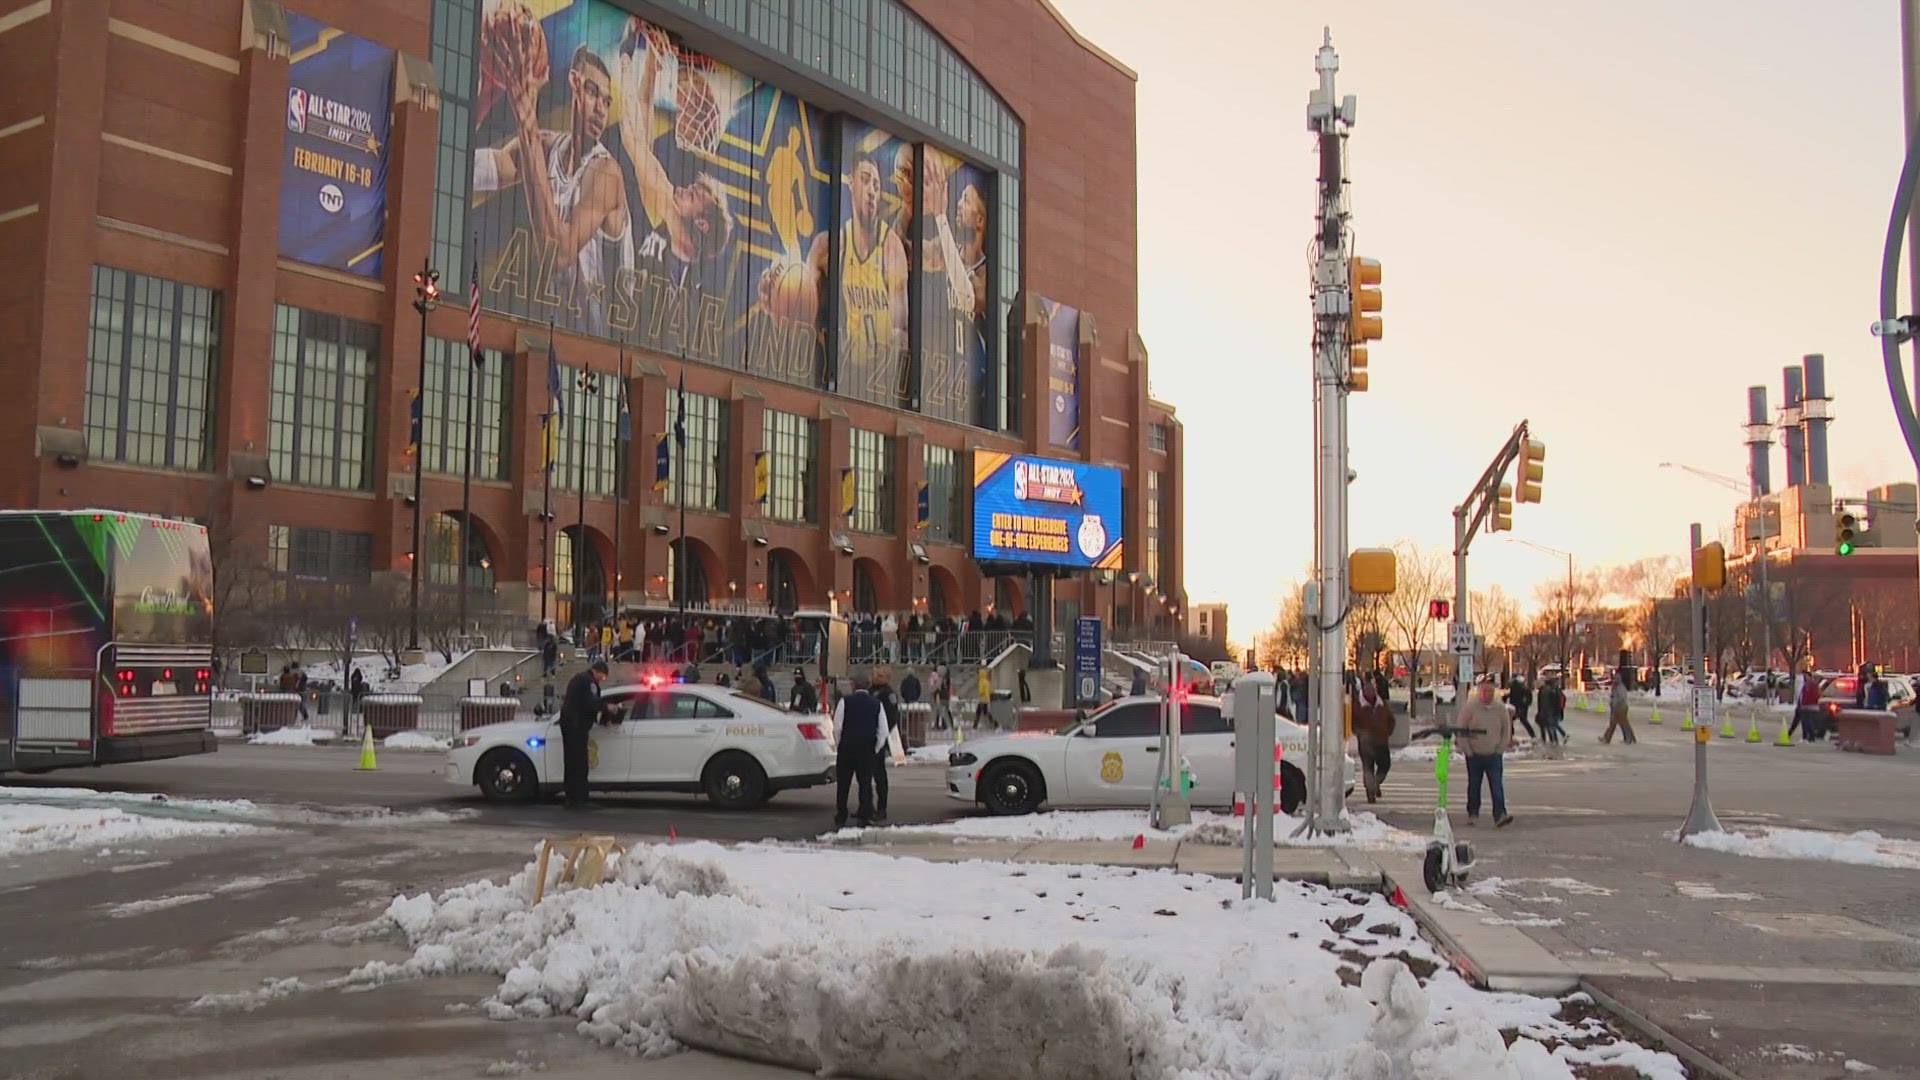 13News reporter Angelica Robinson breaks down the numbers behind the 2024 NBA All-Star Game in Indianapolis.